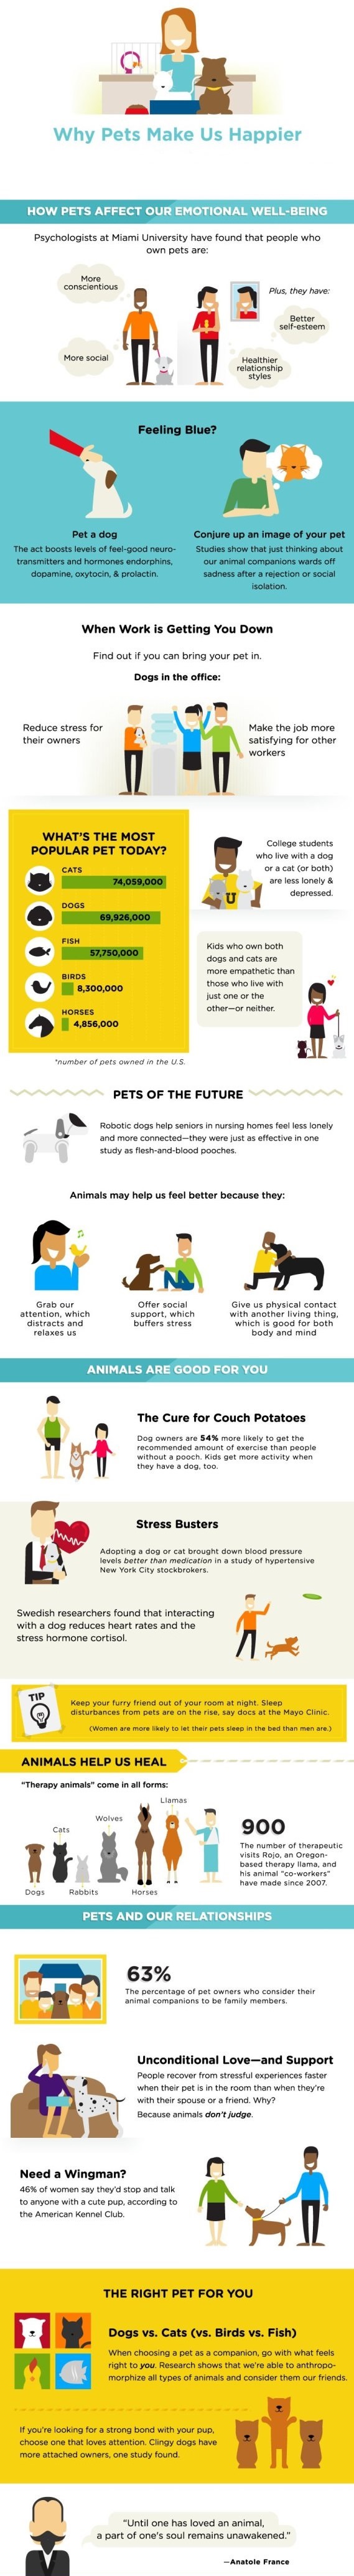 Did You Know Pets Have an Incredible Power?